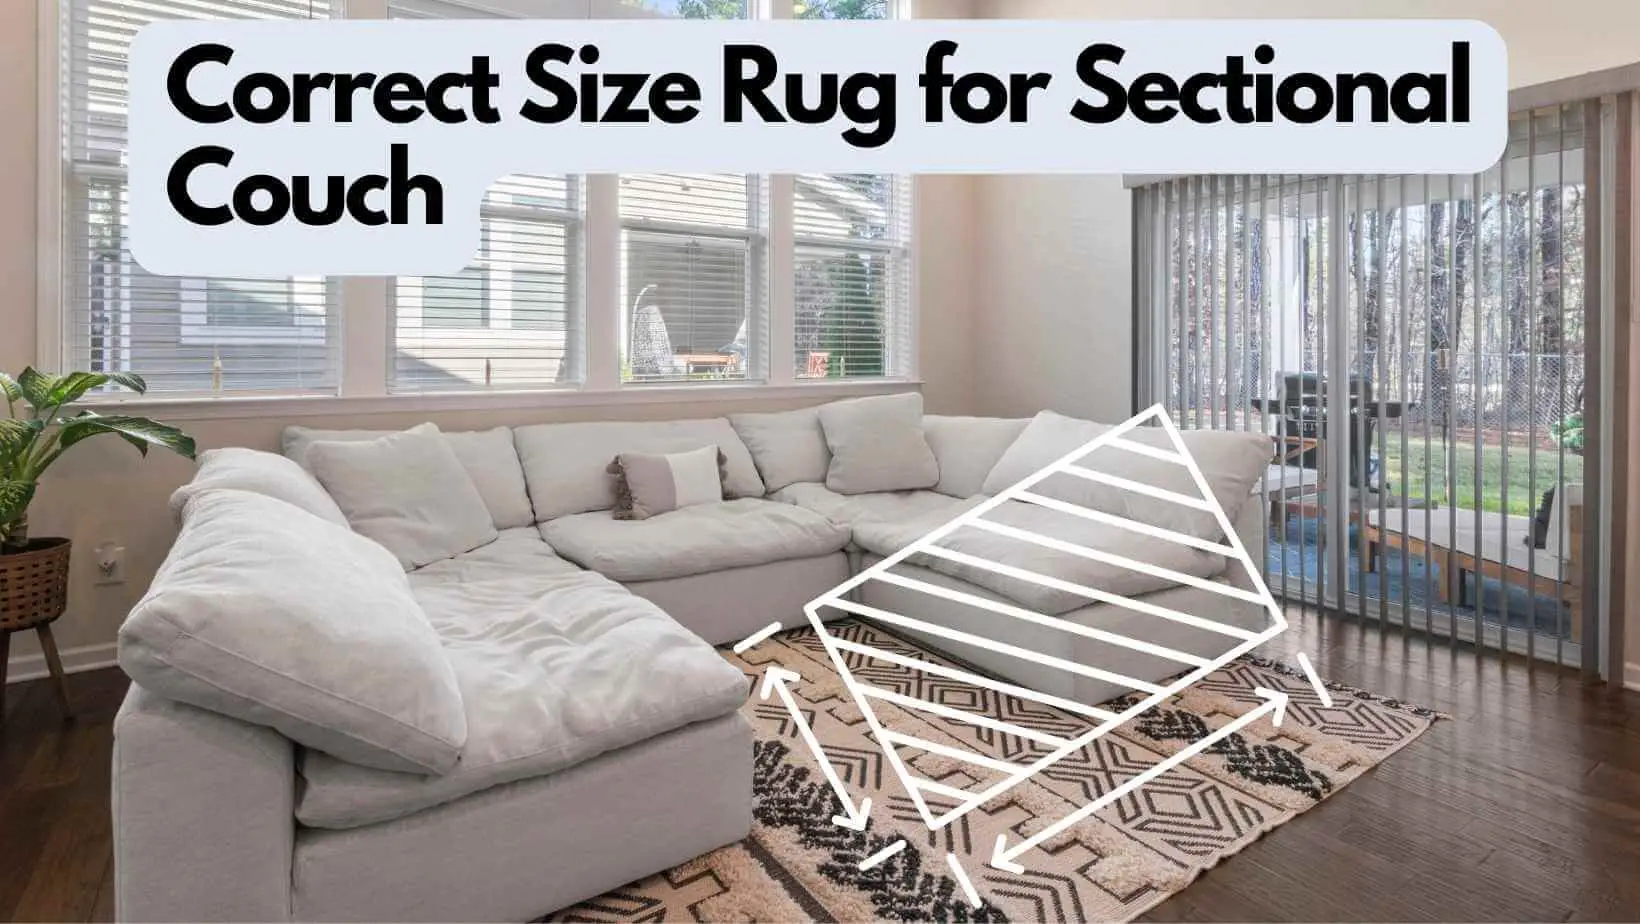 Correct Size Rug for Sectional Couch